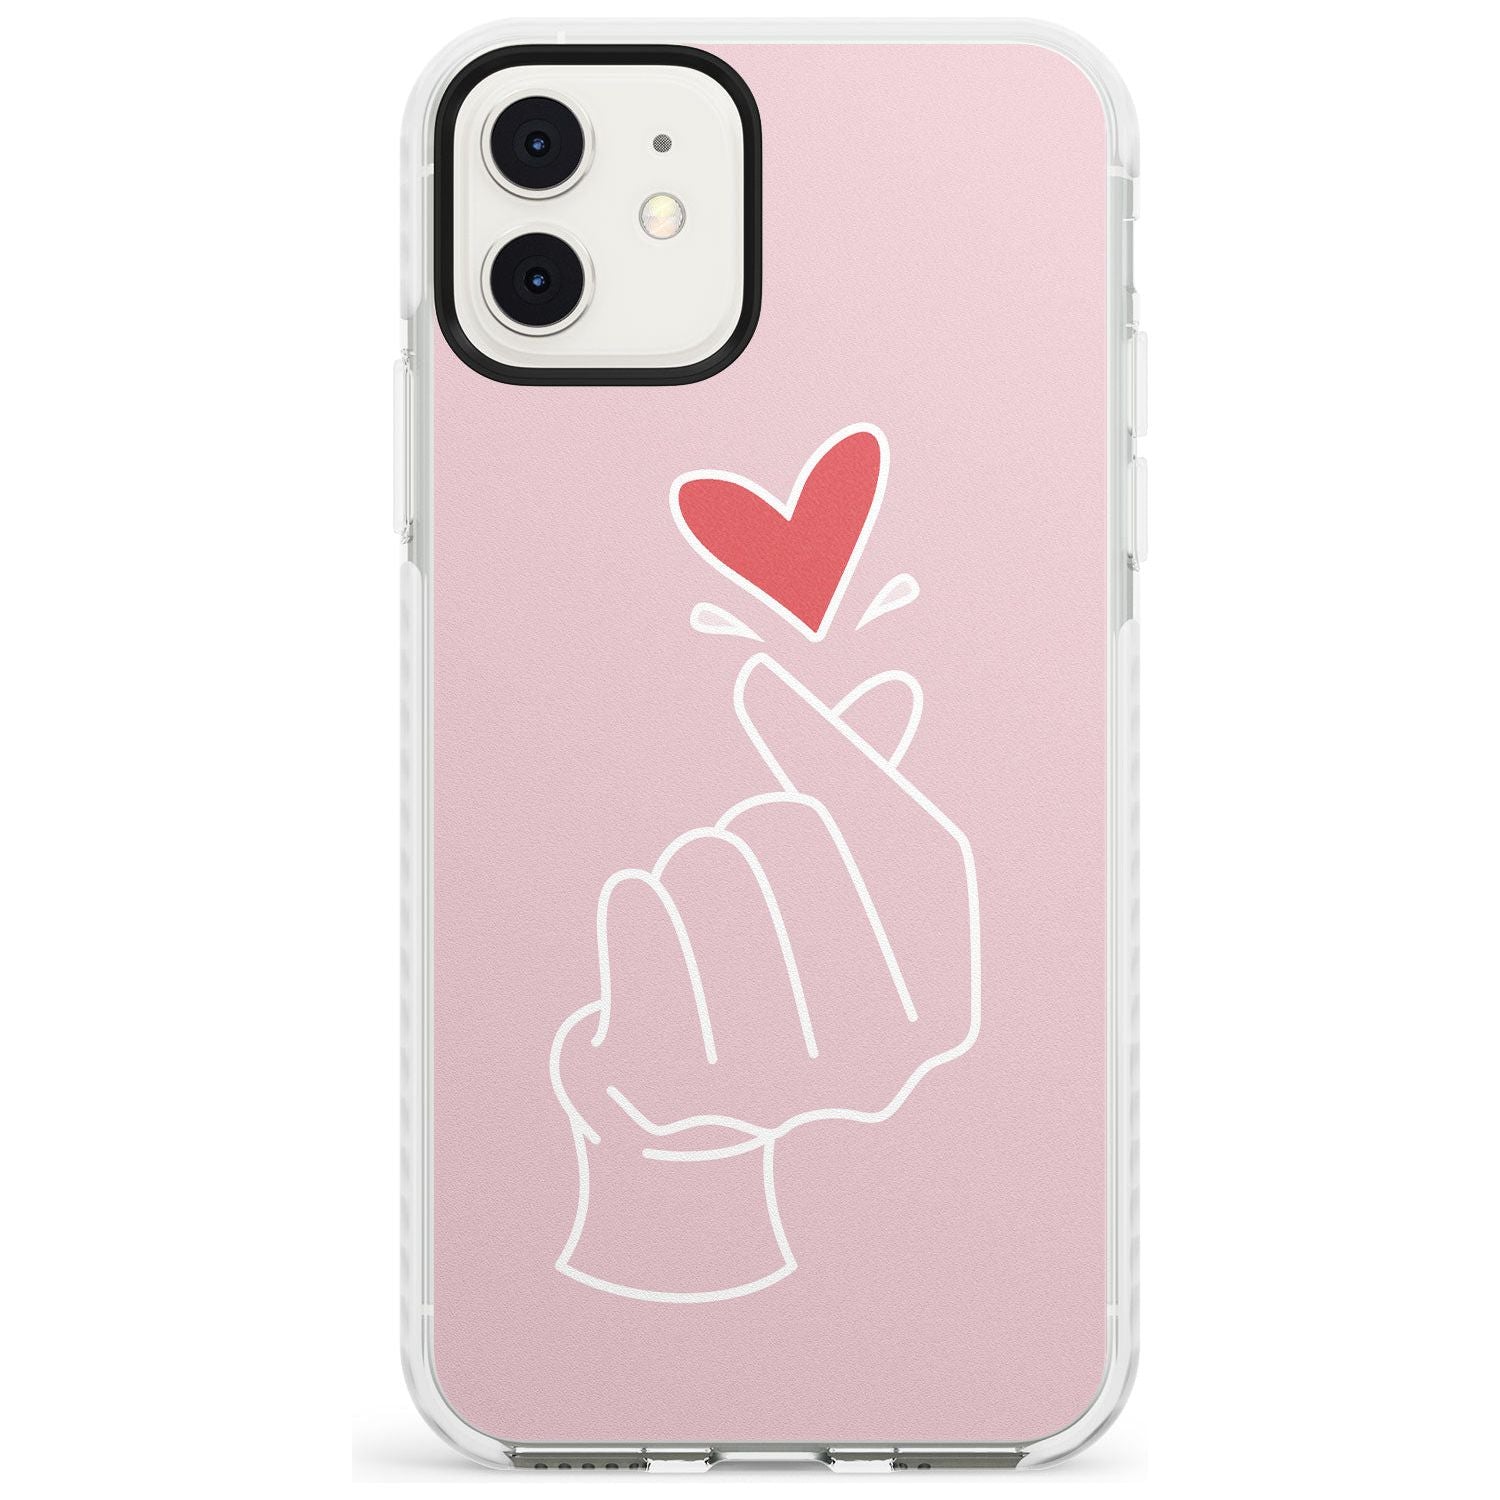 Finger Heart in Pink Slim TPU Phone Case for iPhone 11